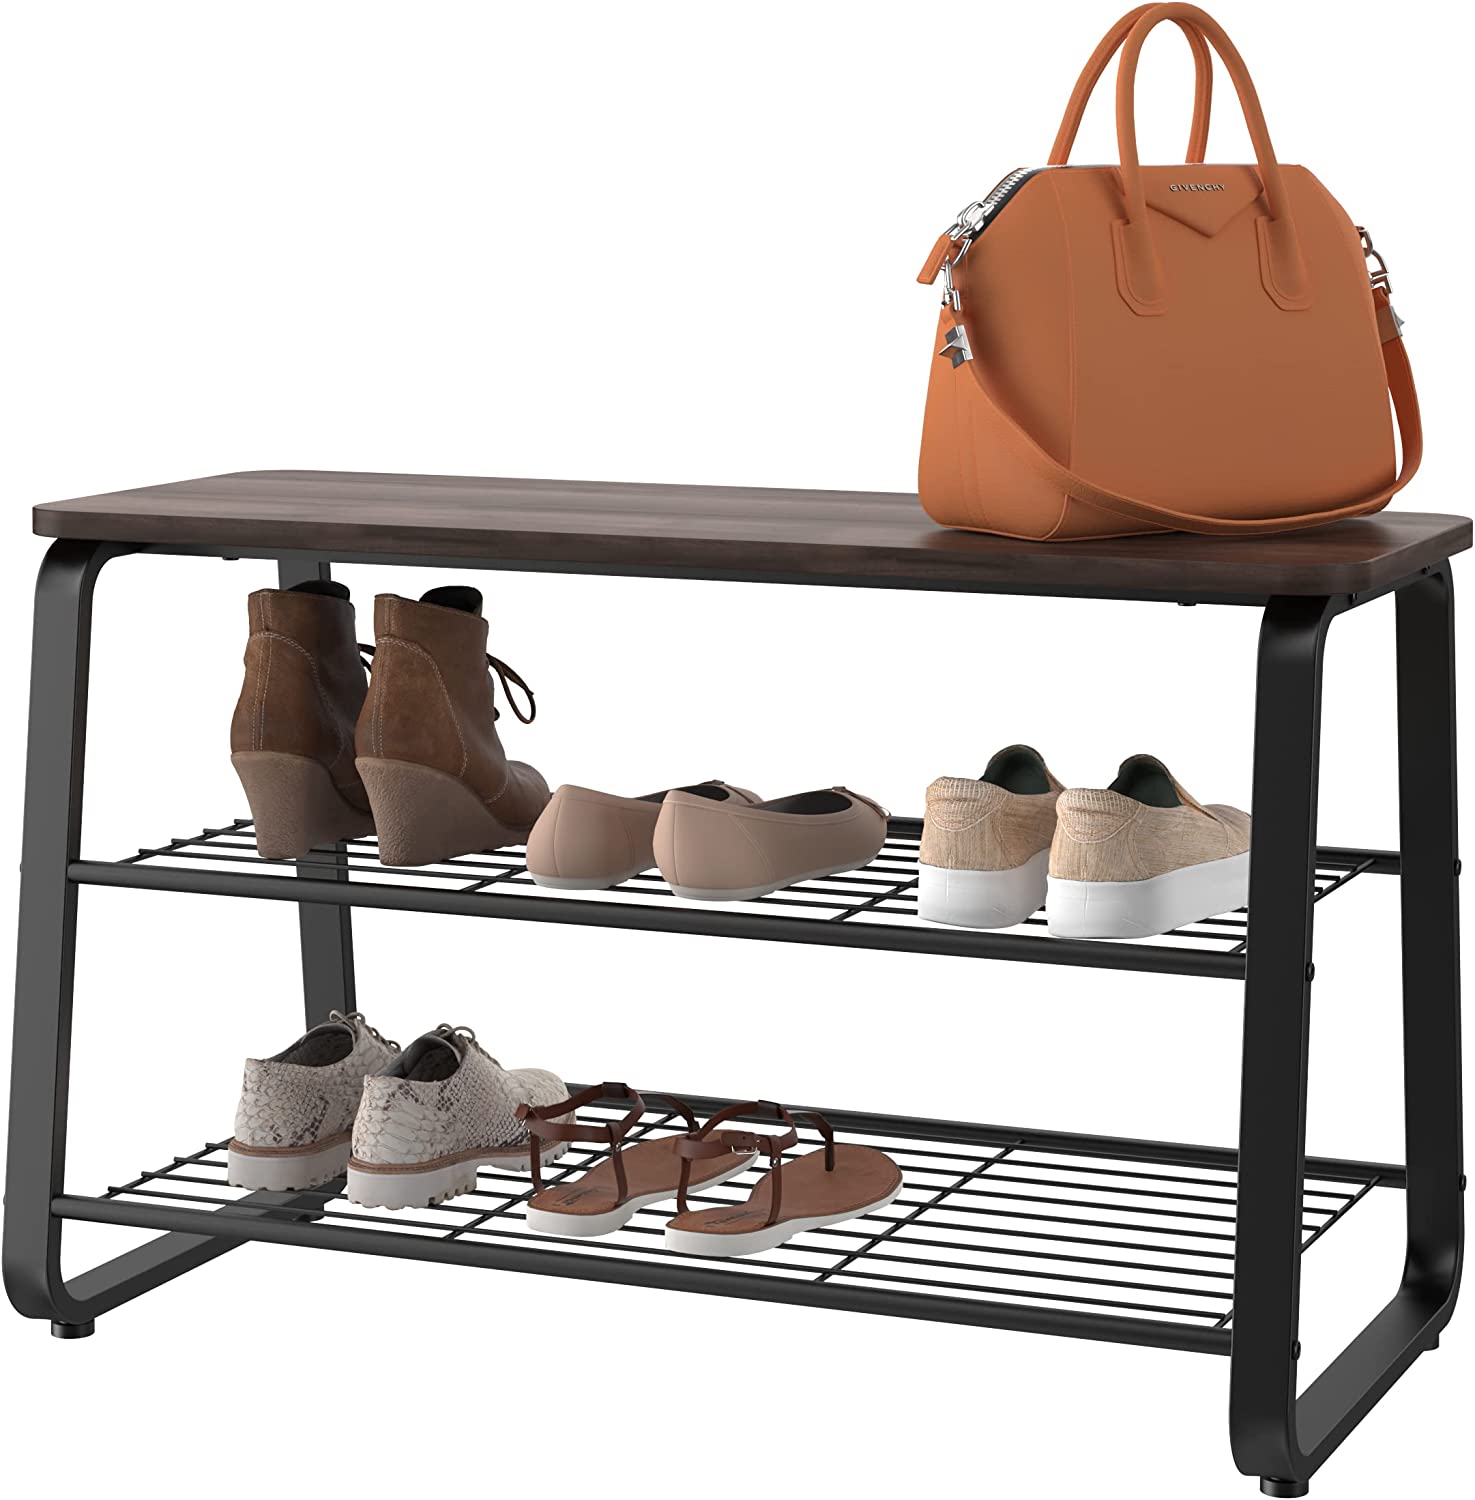 relaxsit 3 Tier Shoe Rack Bench with Metal Frame, Wire Shelves Wood Seat, for Entryway, Hallway, Living Room, Mudroom, Doorway, Modern Walnut Finish